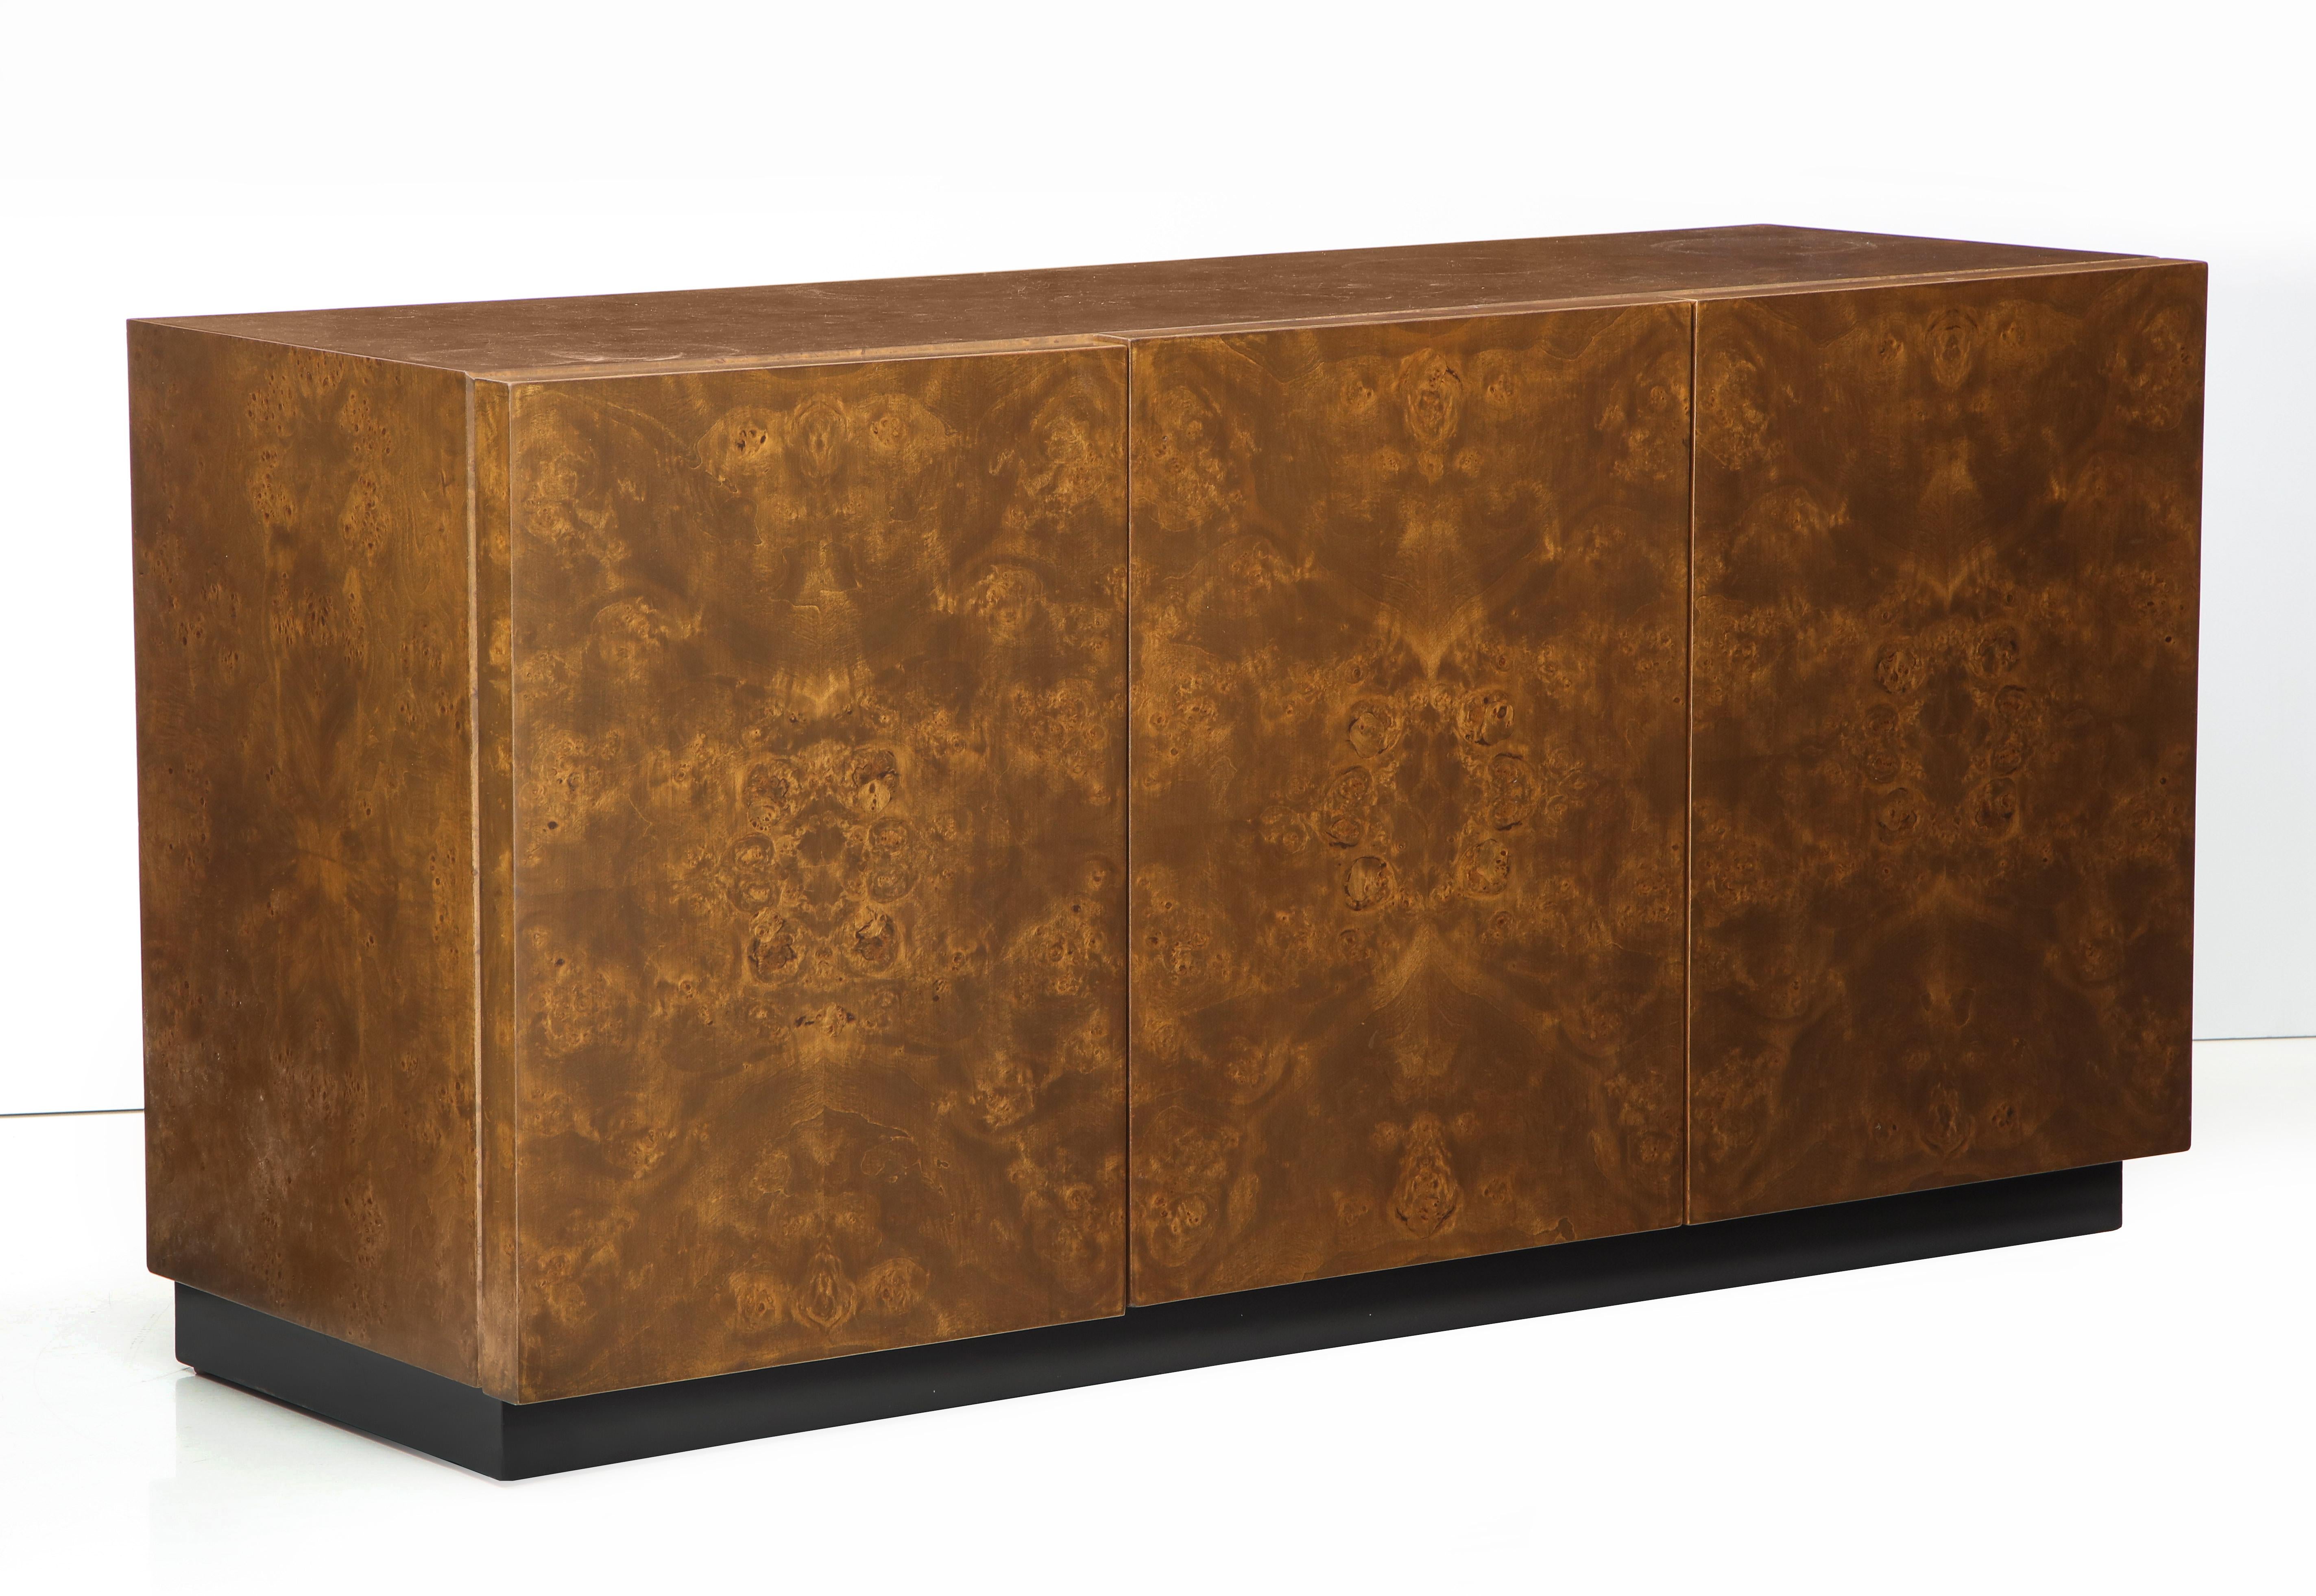 Magnificent 1970s Burl Walnut cabinet with 3 bookmatched front panels. 2 panels open to reveal 2 drawers and shelf, the other opens to compartment with adjustable shelf. Milo Baughman for Thayer Coogin. On display at 200 Lexington Avenue, 10th floor.